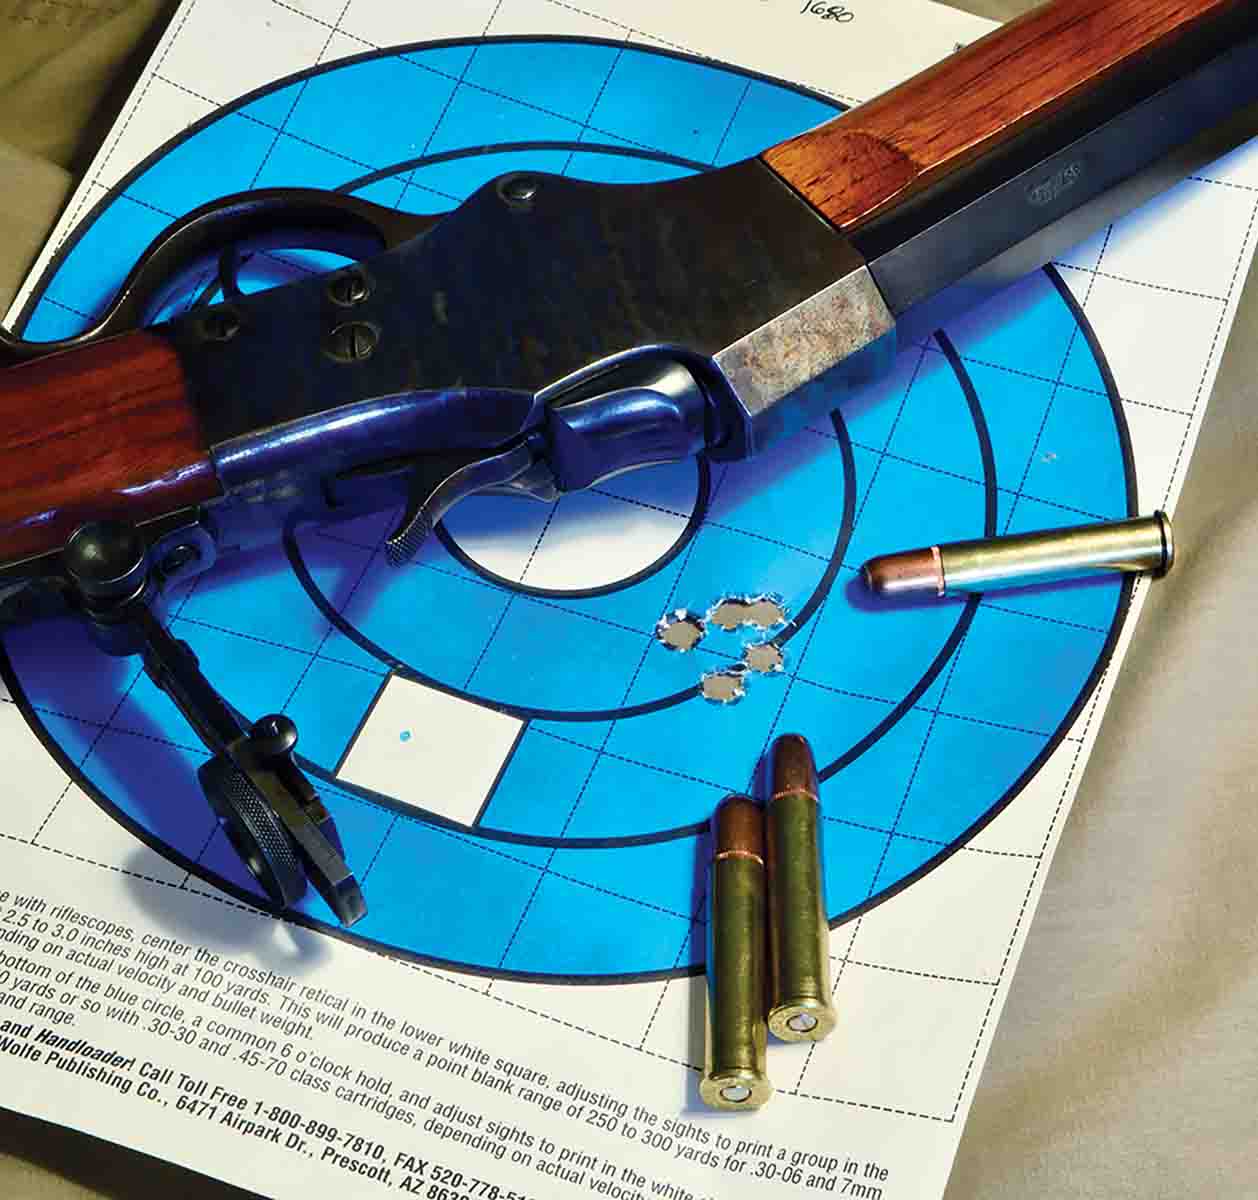 Stevens “Ideal Range” Model 45, sporting its new 357 Maximum barrel. This .722-inch group was shot at 37 yards, while experimenting with different apertures for the globe front sight. Even so, not bad for the venerable Sierra (.358-inch) 200-grain roundnose, made famous in the 35 Remington. Alas, at 100 yards, all the good, close-in groups opened up, some quite  dramatically. This load at 100 yards recorded a 2.7-inch, five-shot group – still very good – with iron sights.